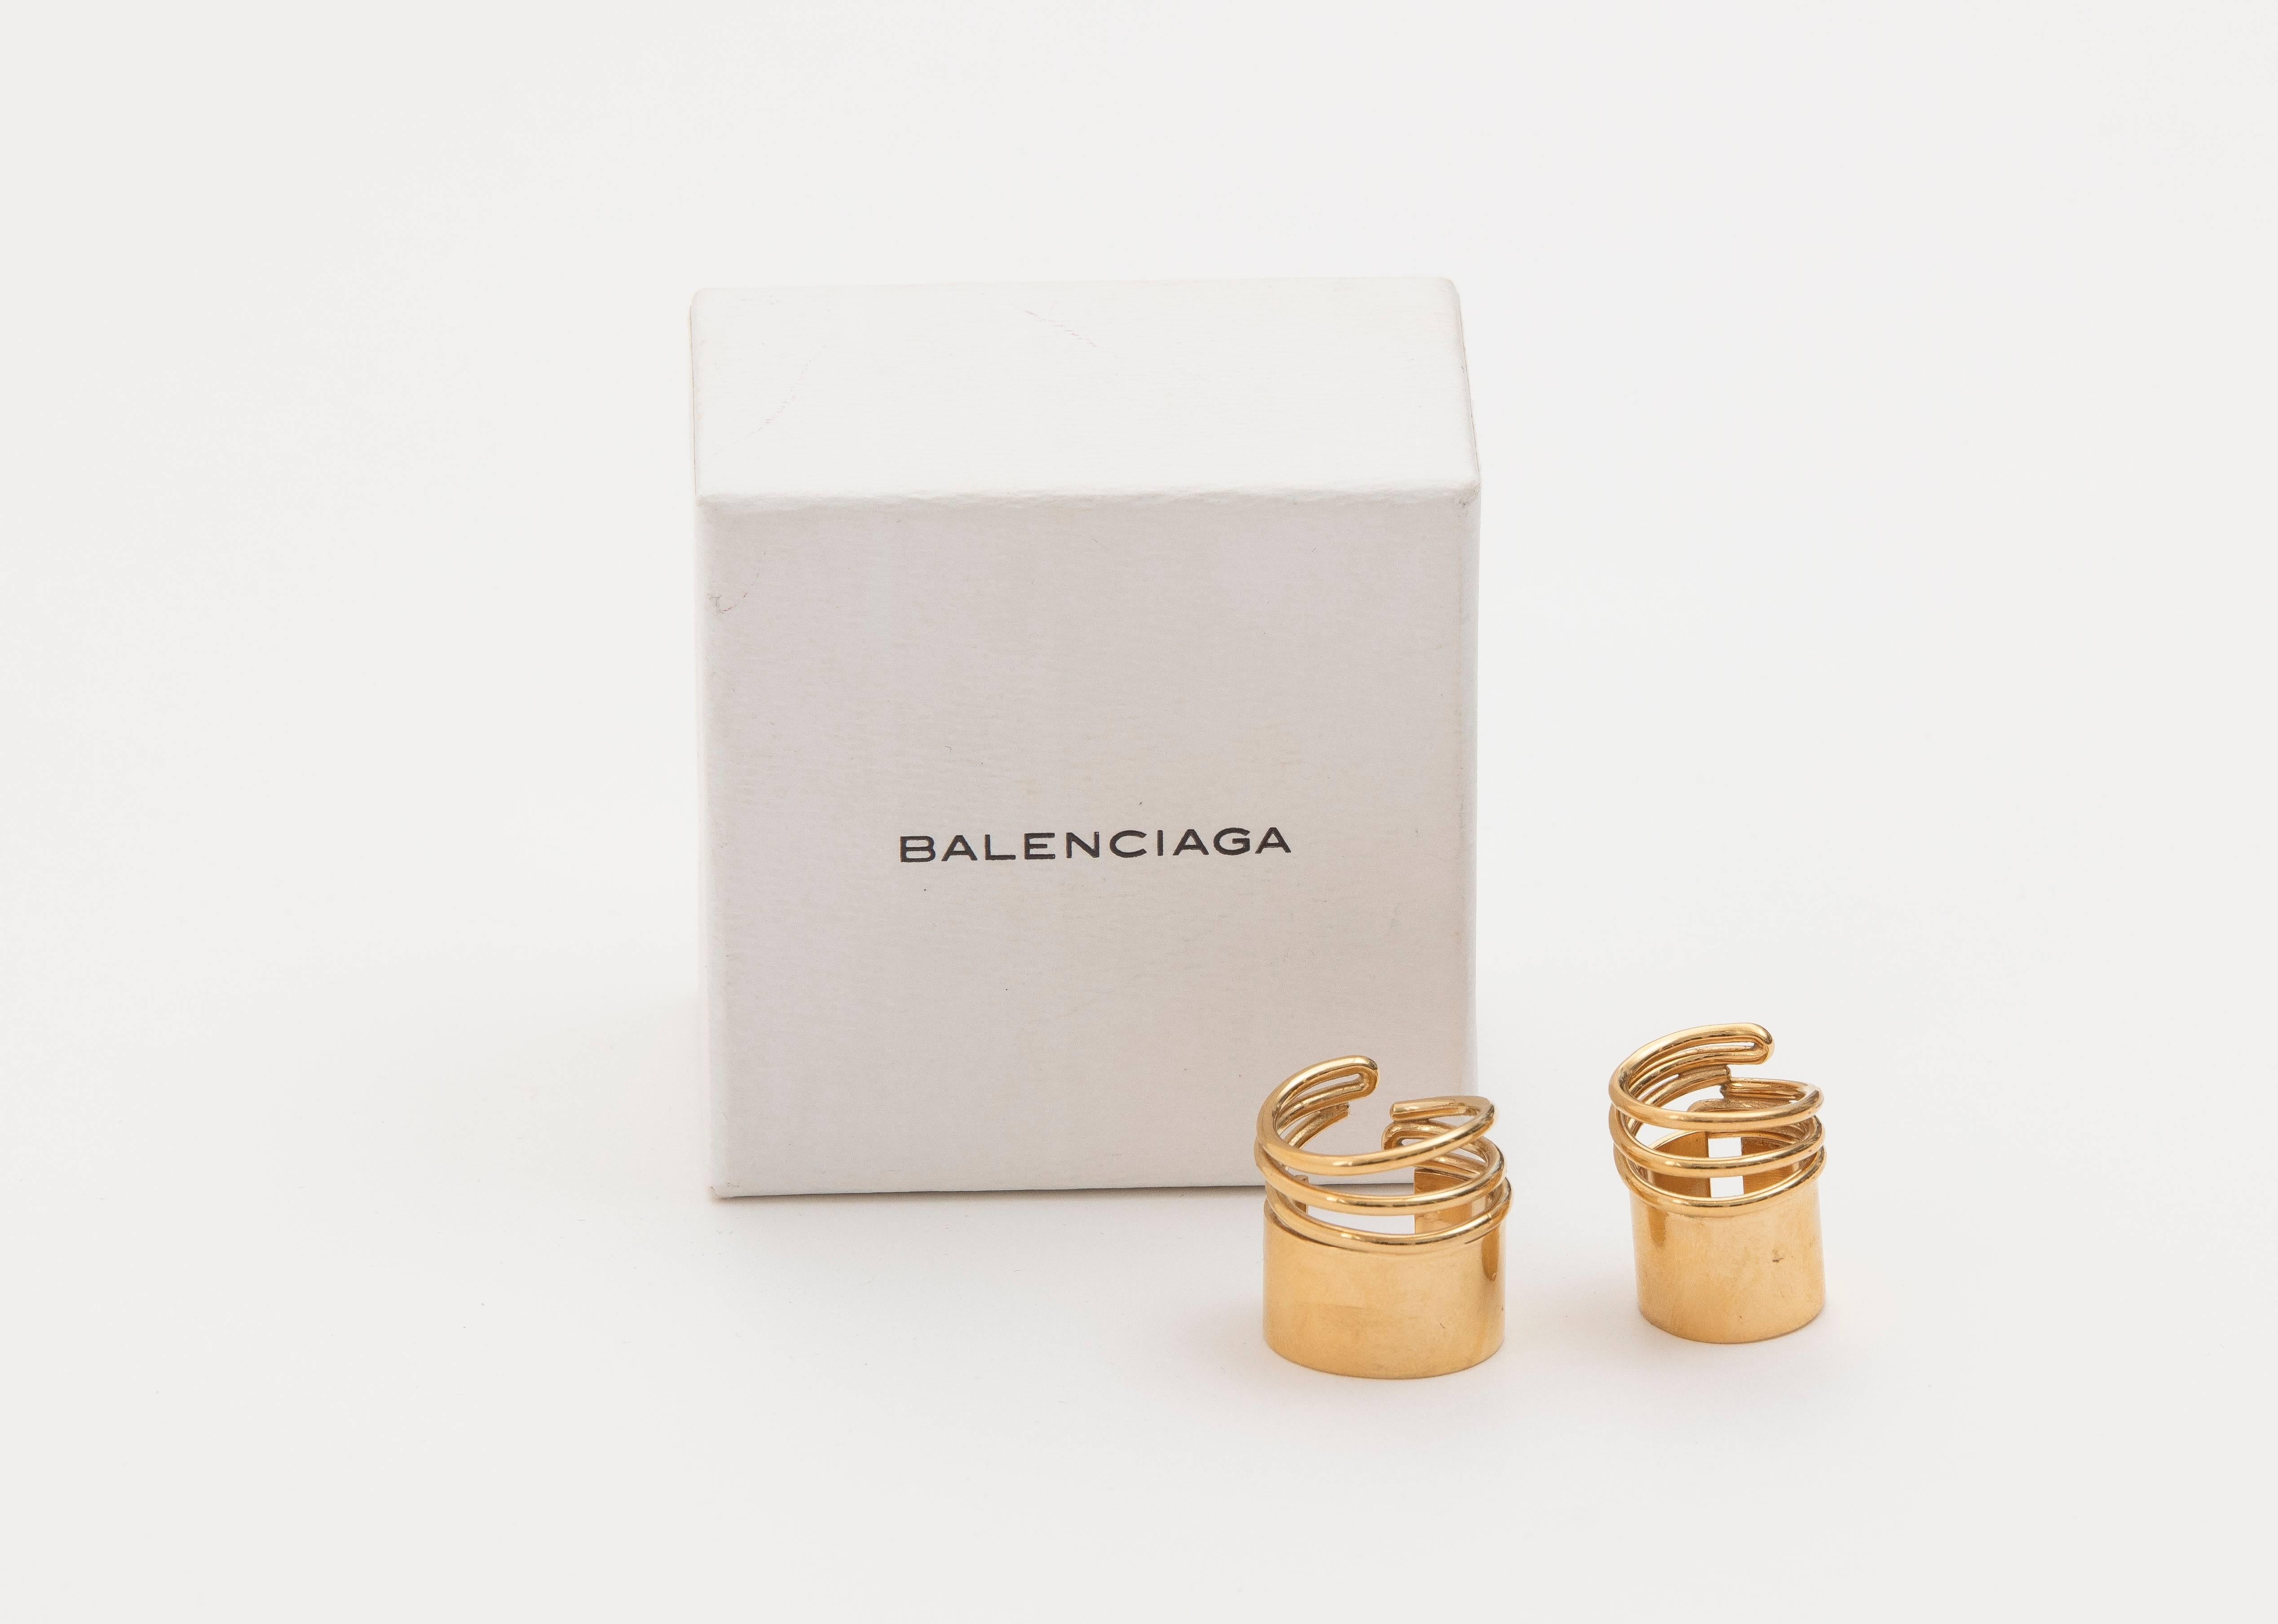 Balenciaga by Nicolas Ghesquière, Spring-Summer 2013 two gold tone brass coil rings designed by Charlotte Chesnais.  Comes in original box and pouch.

Size 5
Size 3.5